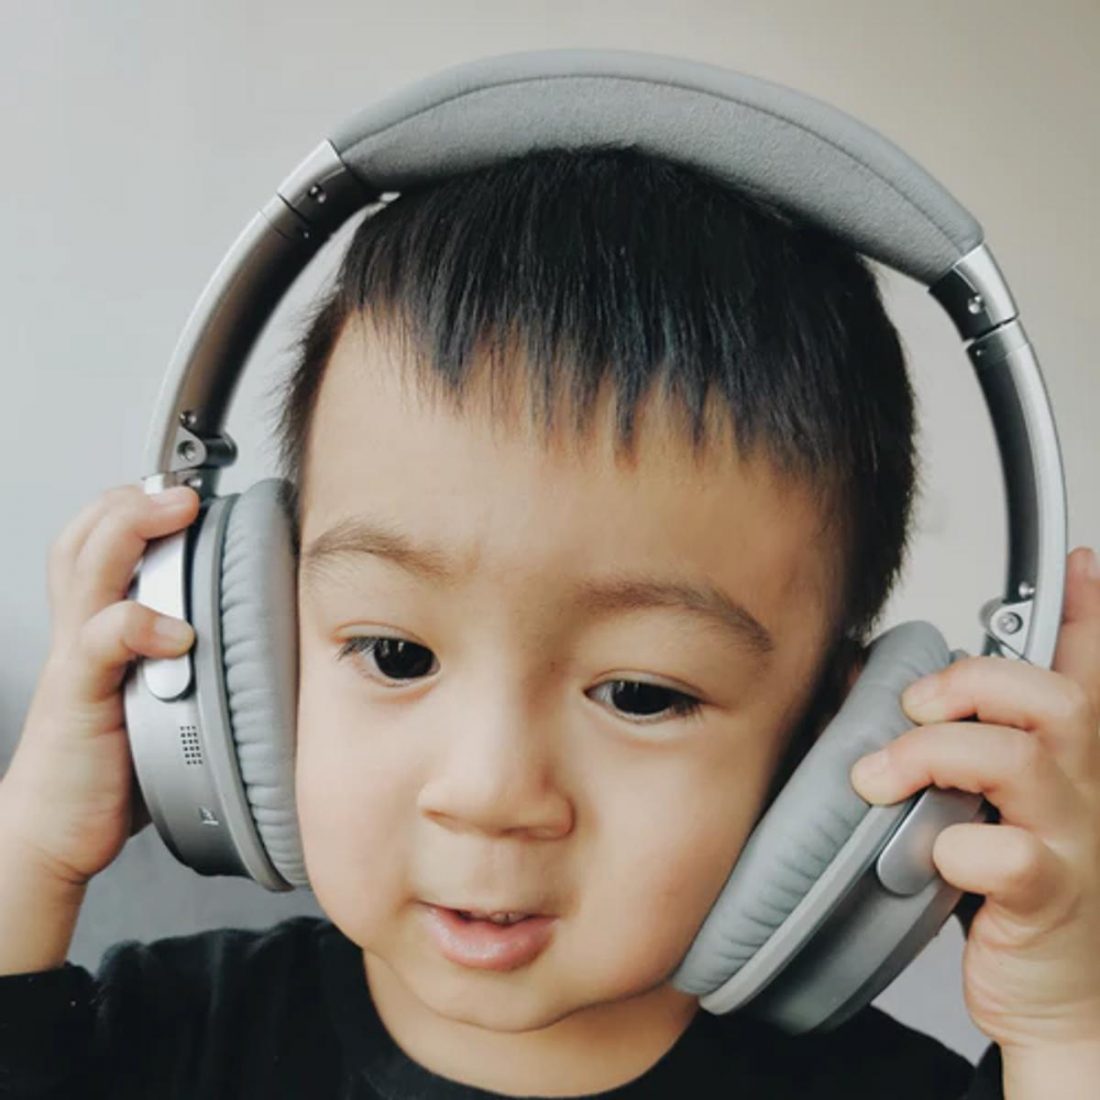 Boy wearing headphones that do not fit him well. (From: Unsplash)